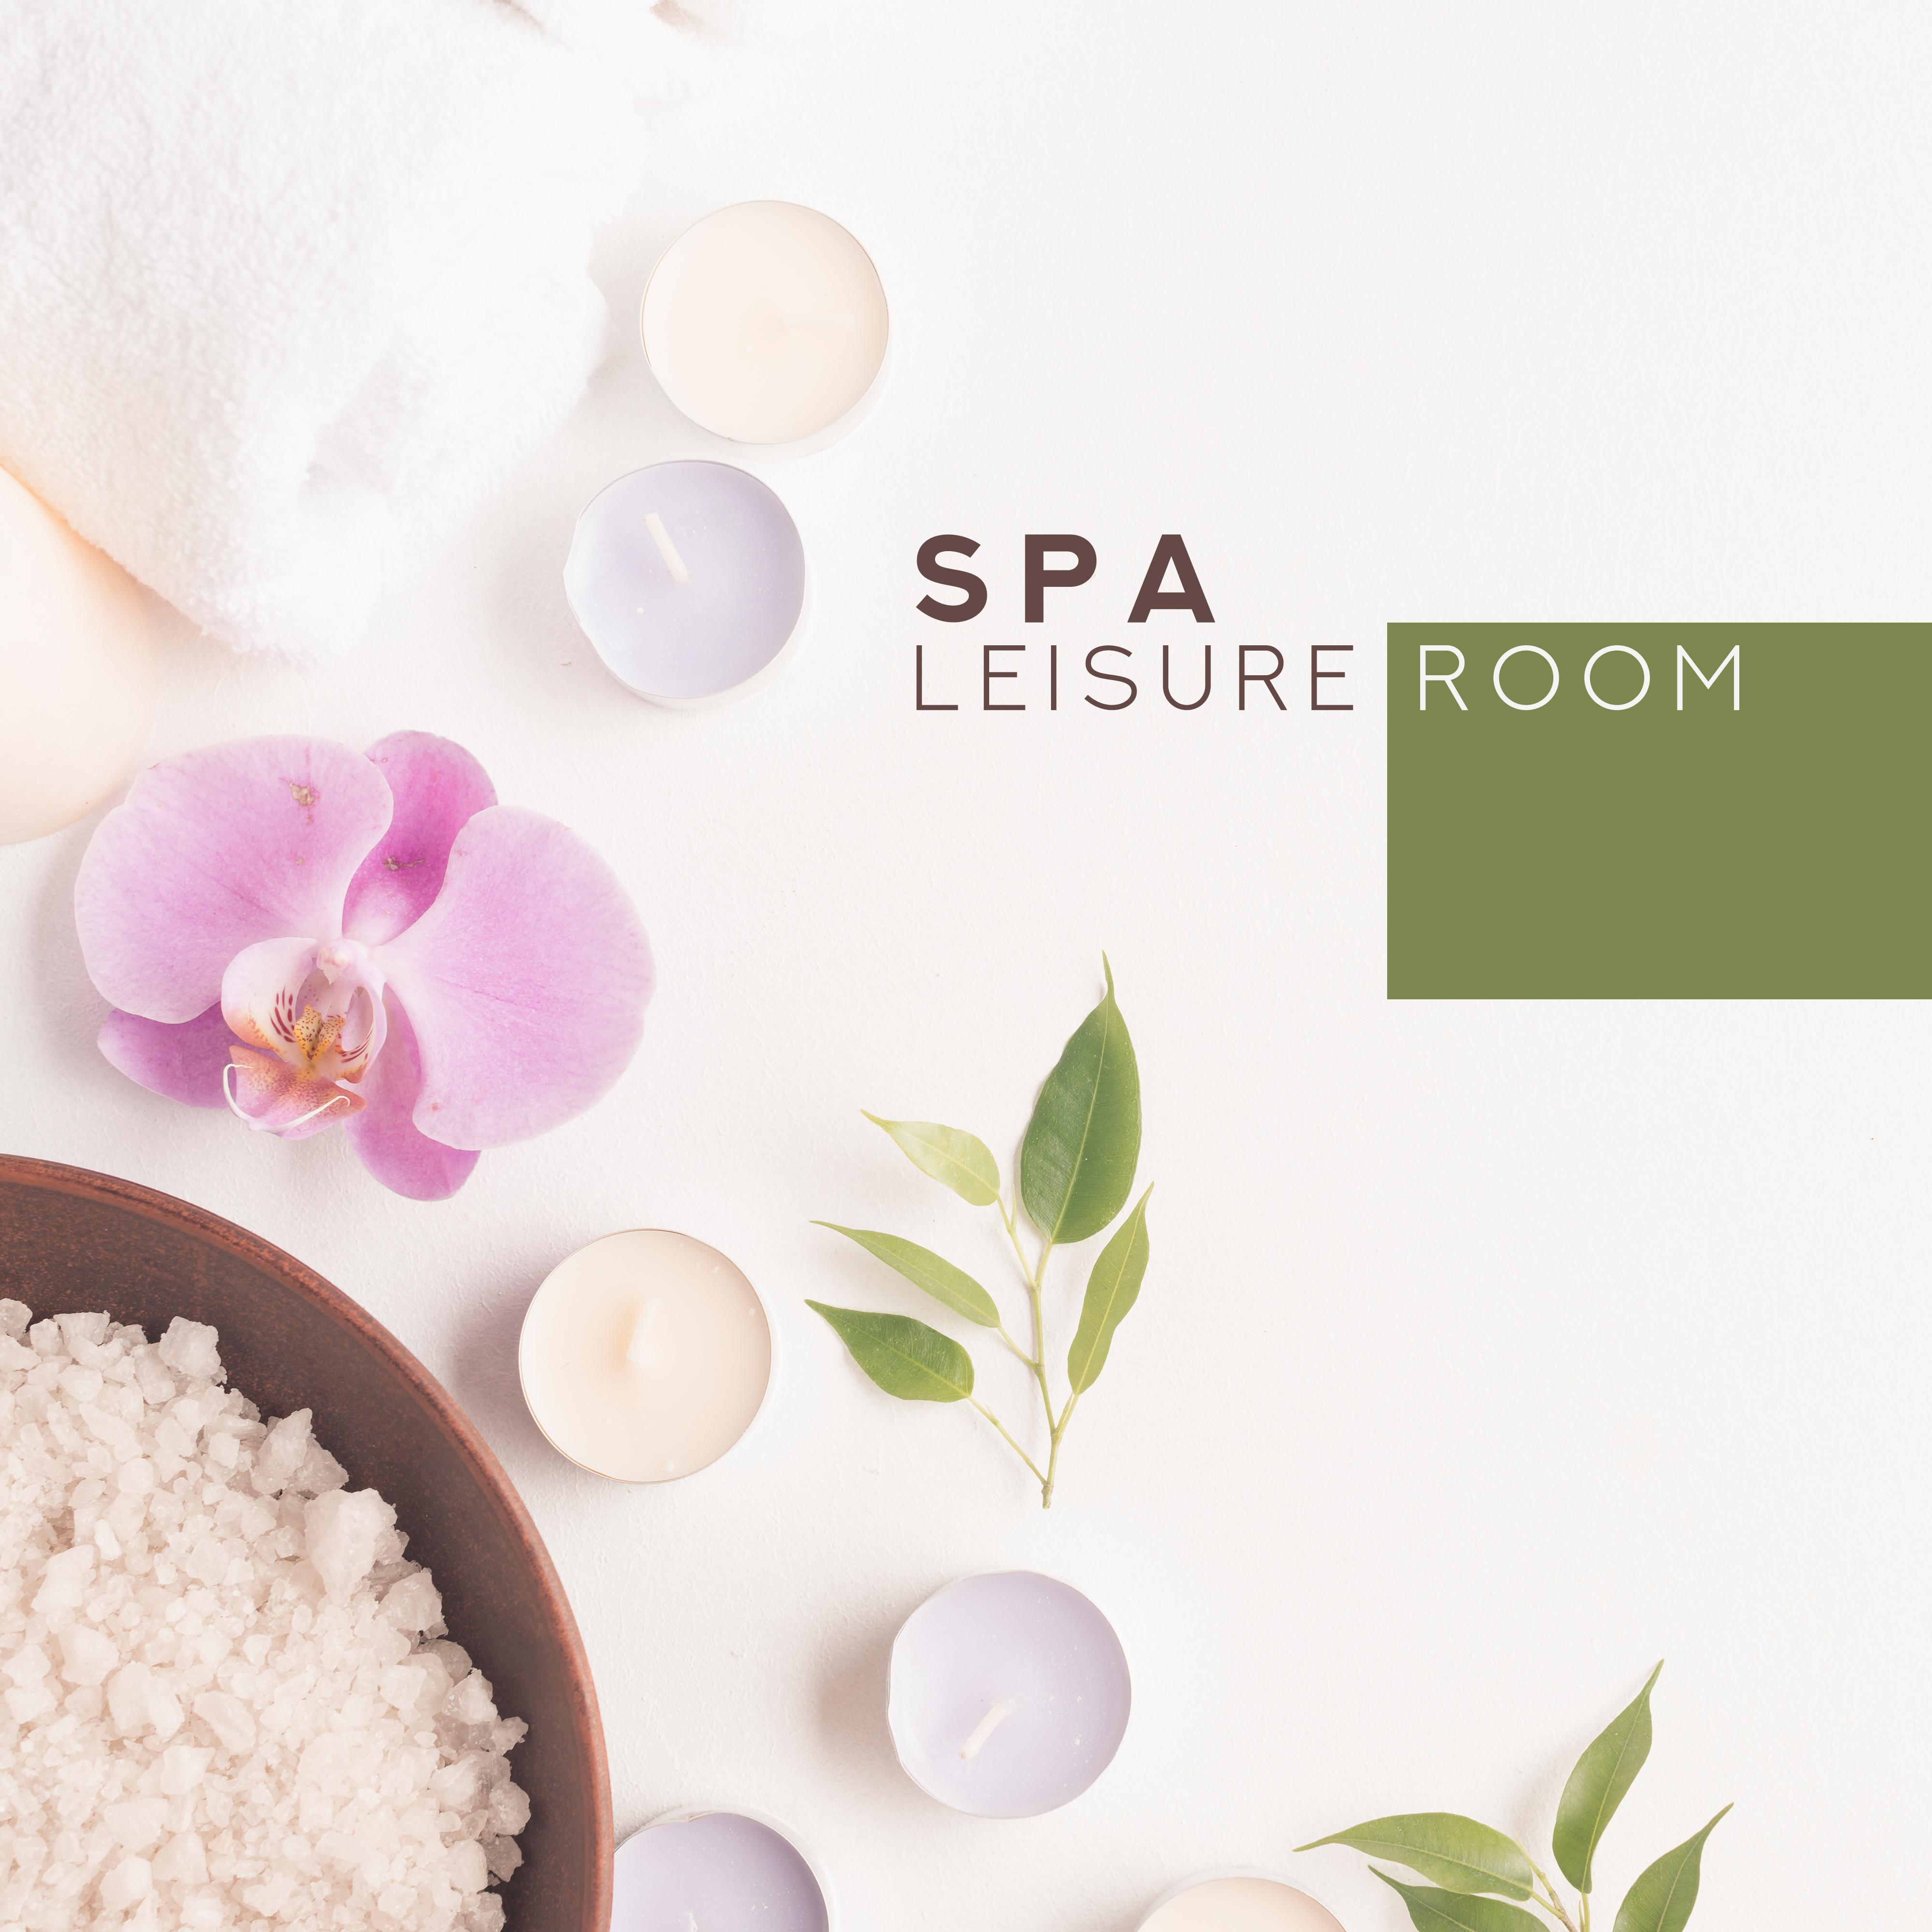 Spa Leisure Room: Music for Chilling Out, Resting, De-stressing and Relaxation